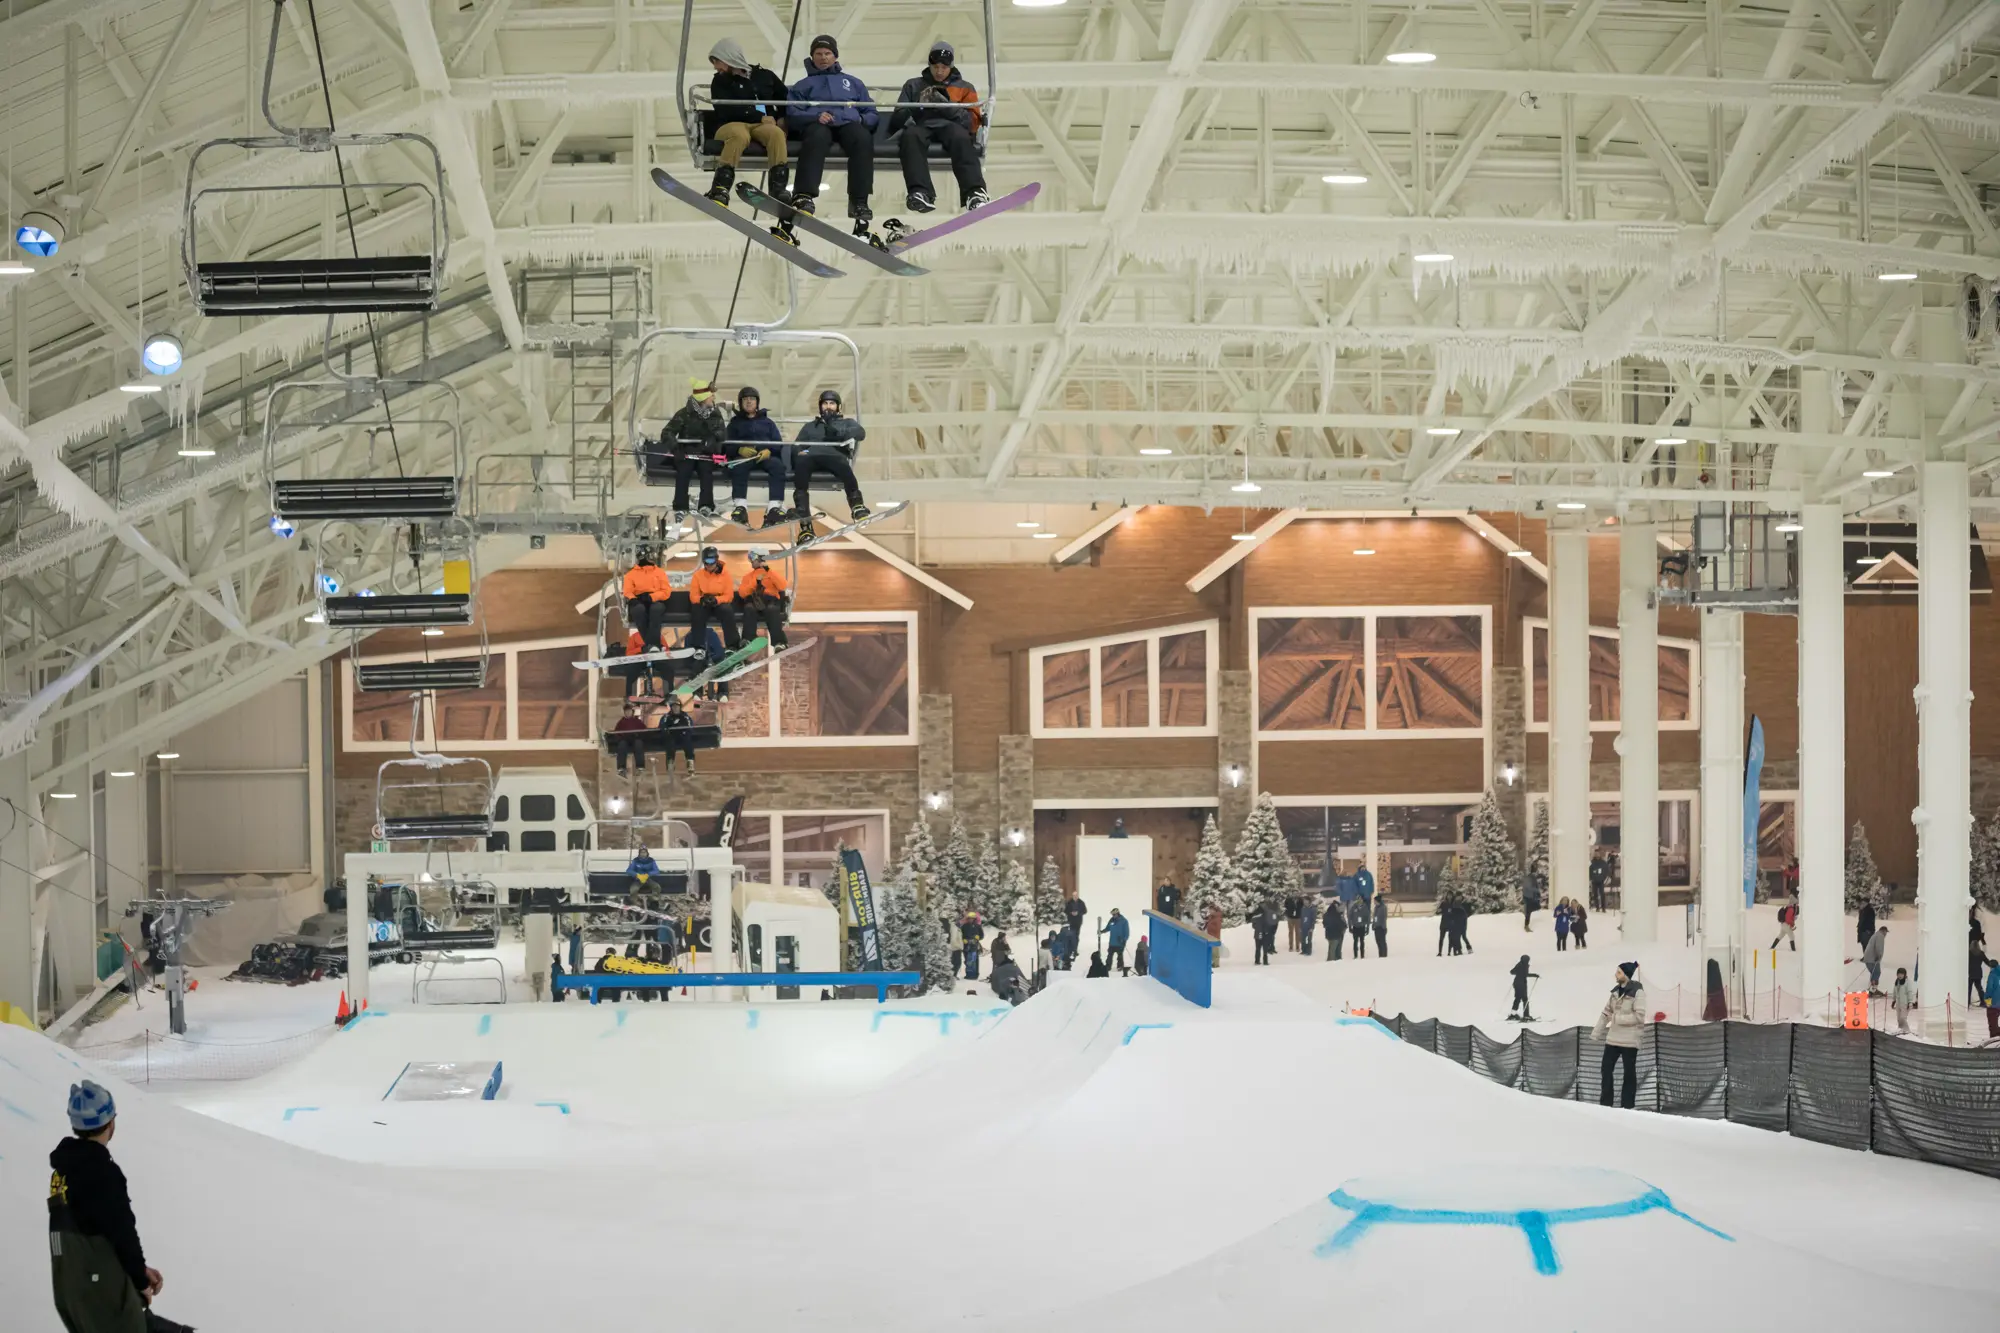 North America's first indoor ski resort is now open at New Jersey's  American Dream mega-mall